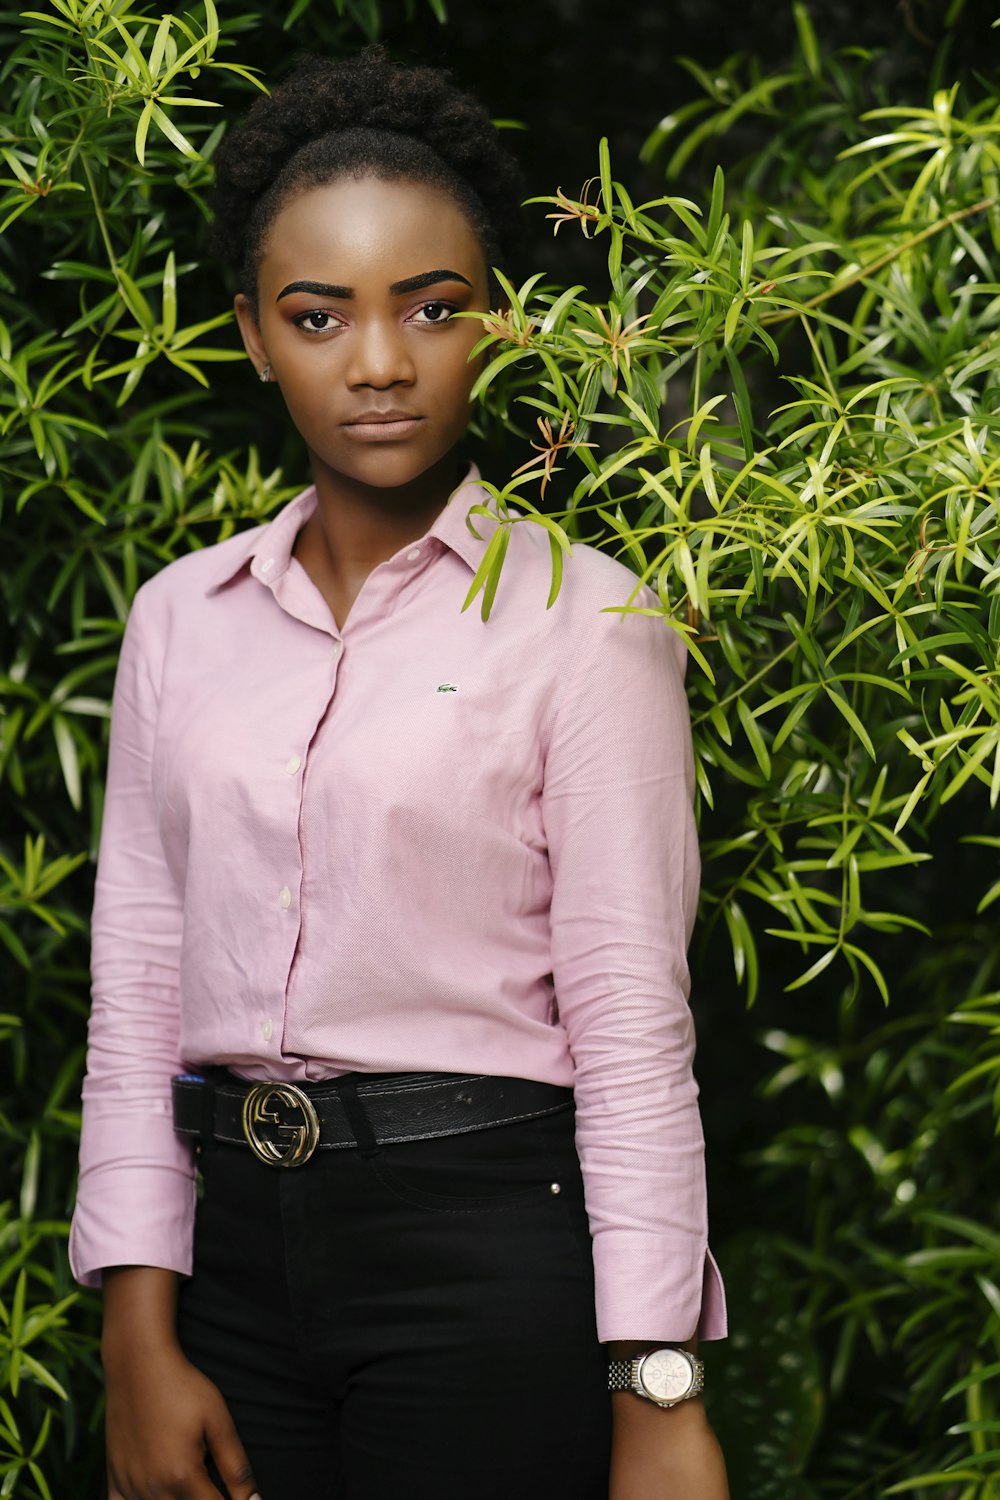 woman in pink dress shirt and black pants standing near green plants during daytime